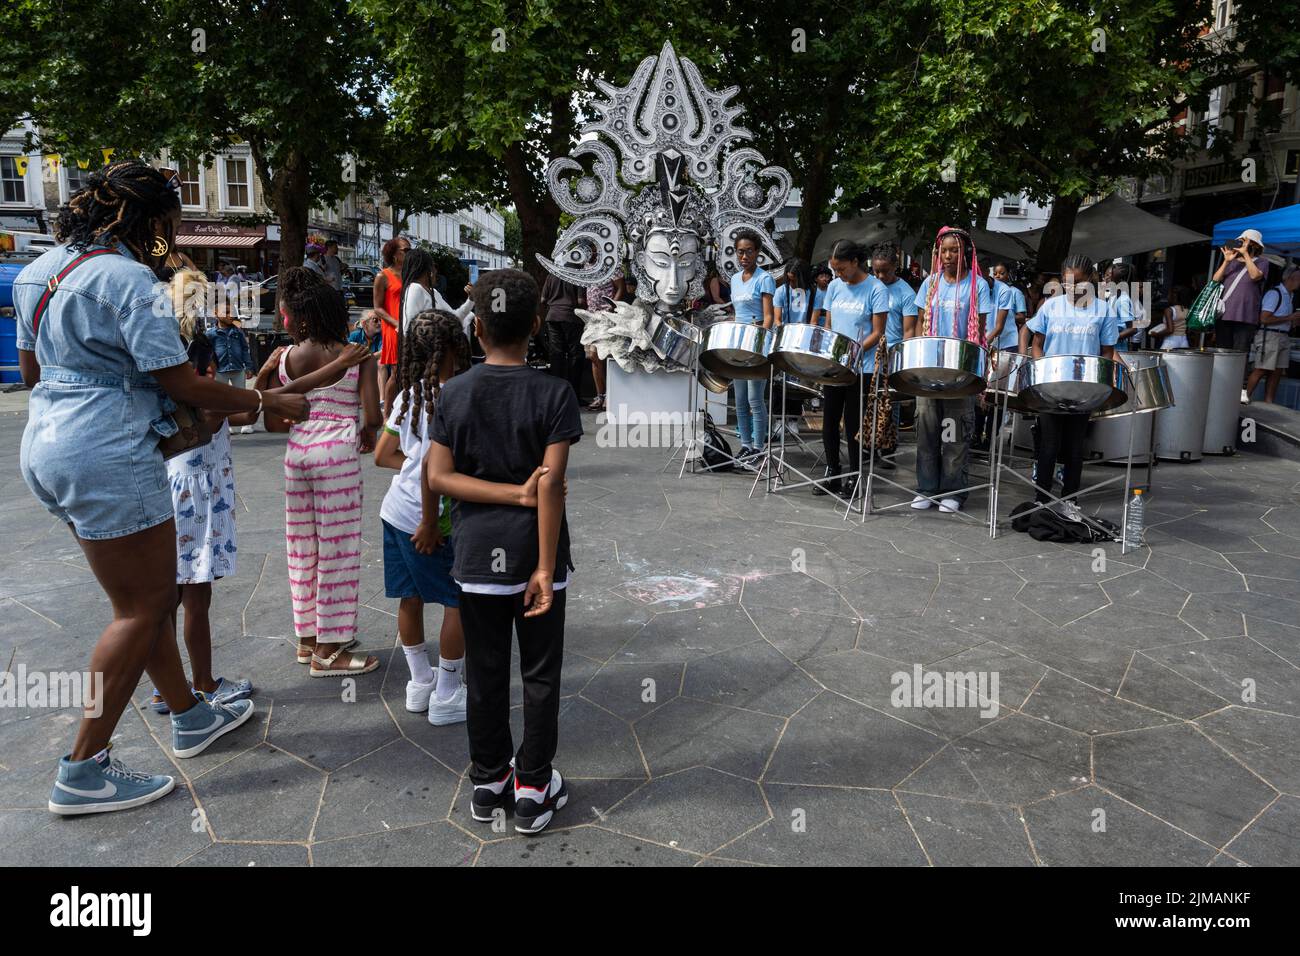 London, UK.  5 August 2022. The New Generation Steel Orchestra performs at Carnival in Chelsea, an event showcasing carnival costumes, music and culture.  The show is outside The Chelsea Theatre and is part of this year’s Kensington & Chelsea Festival. Credit: Stephen Chung / Alamy Live News Stock Photo